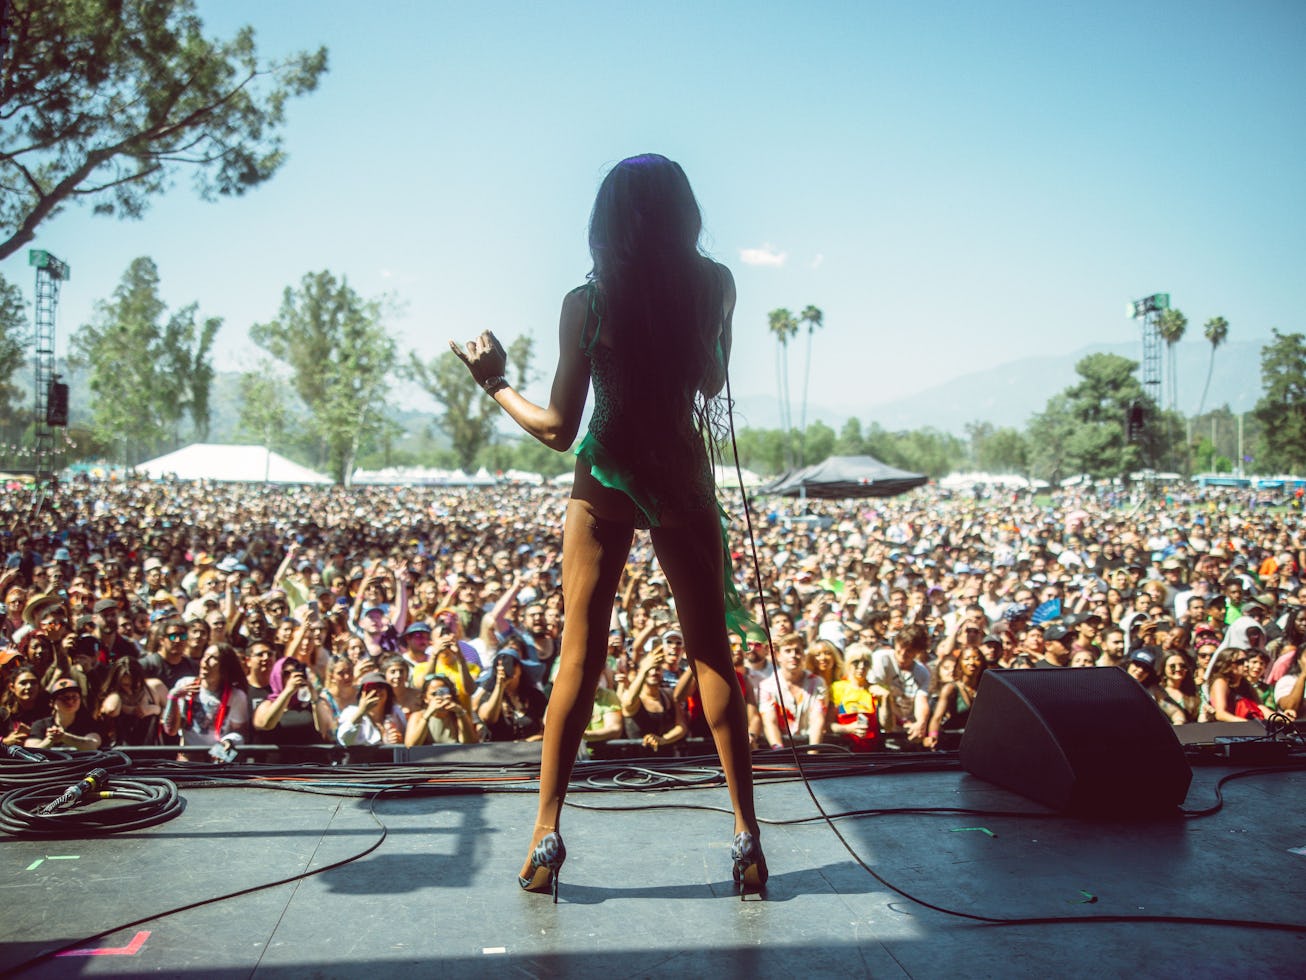 Azealia Banks onstage at the Just Like Heaven festival.